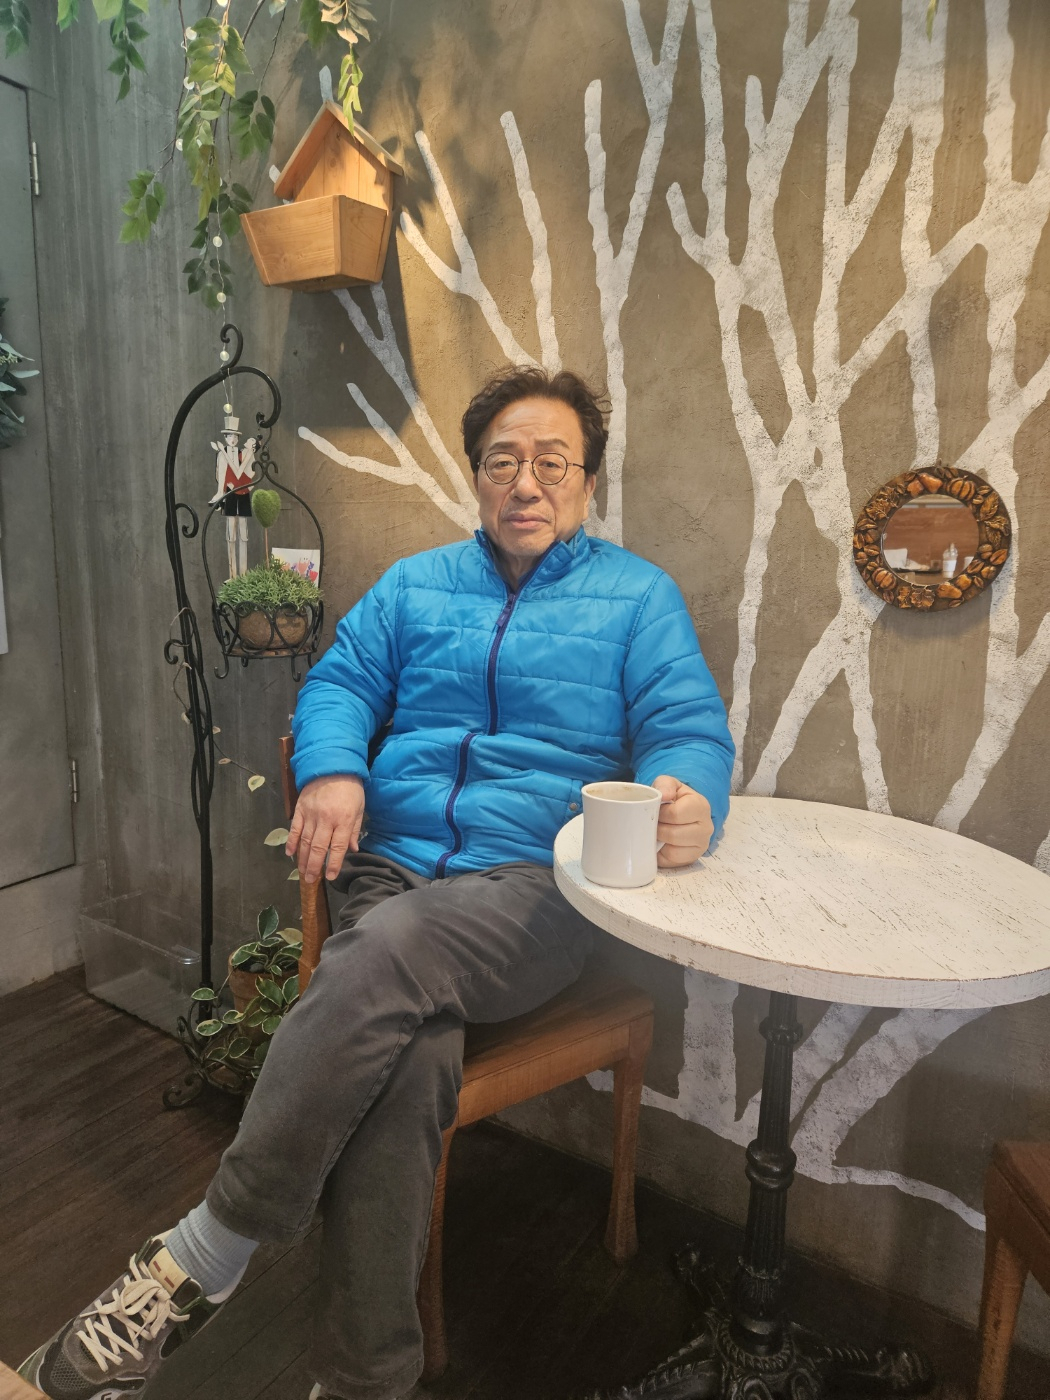 Park Jai-koo, a 67-year-old resident of Yongin, Gyeonggi Province, poses for a photo at a cafe in Yongsan-gu, Seoul. (The Korea Herald)